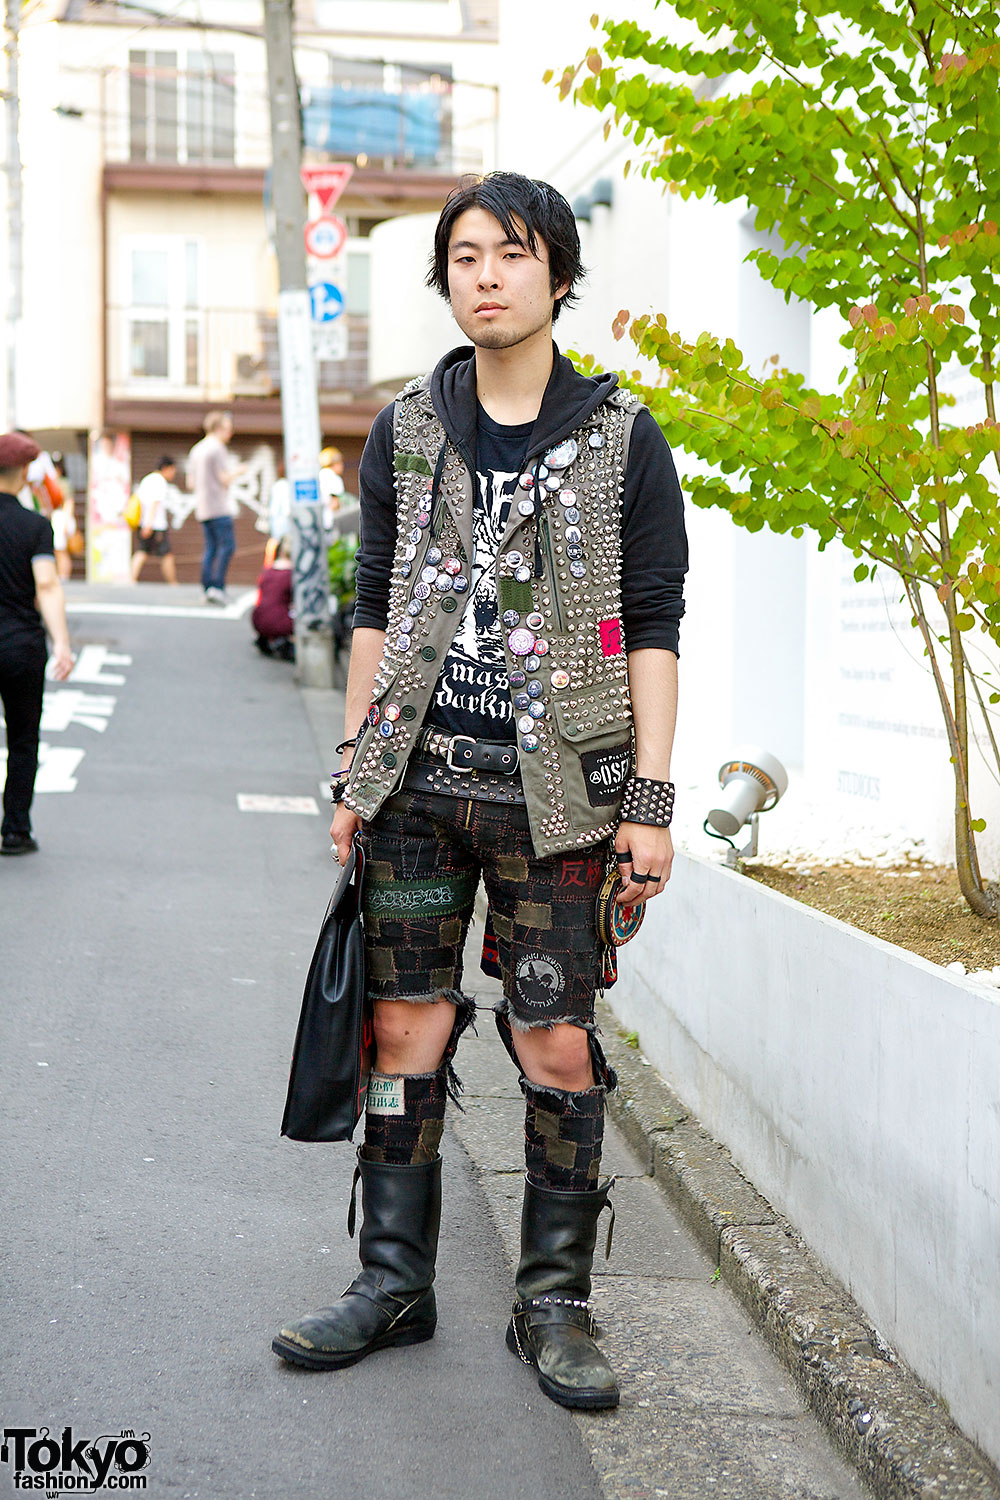 ... . He also men   tioned that he's a fan of the Japanese punk band Osen